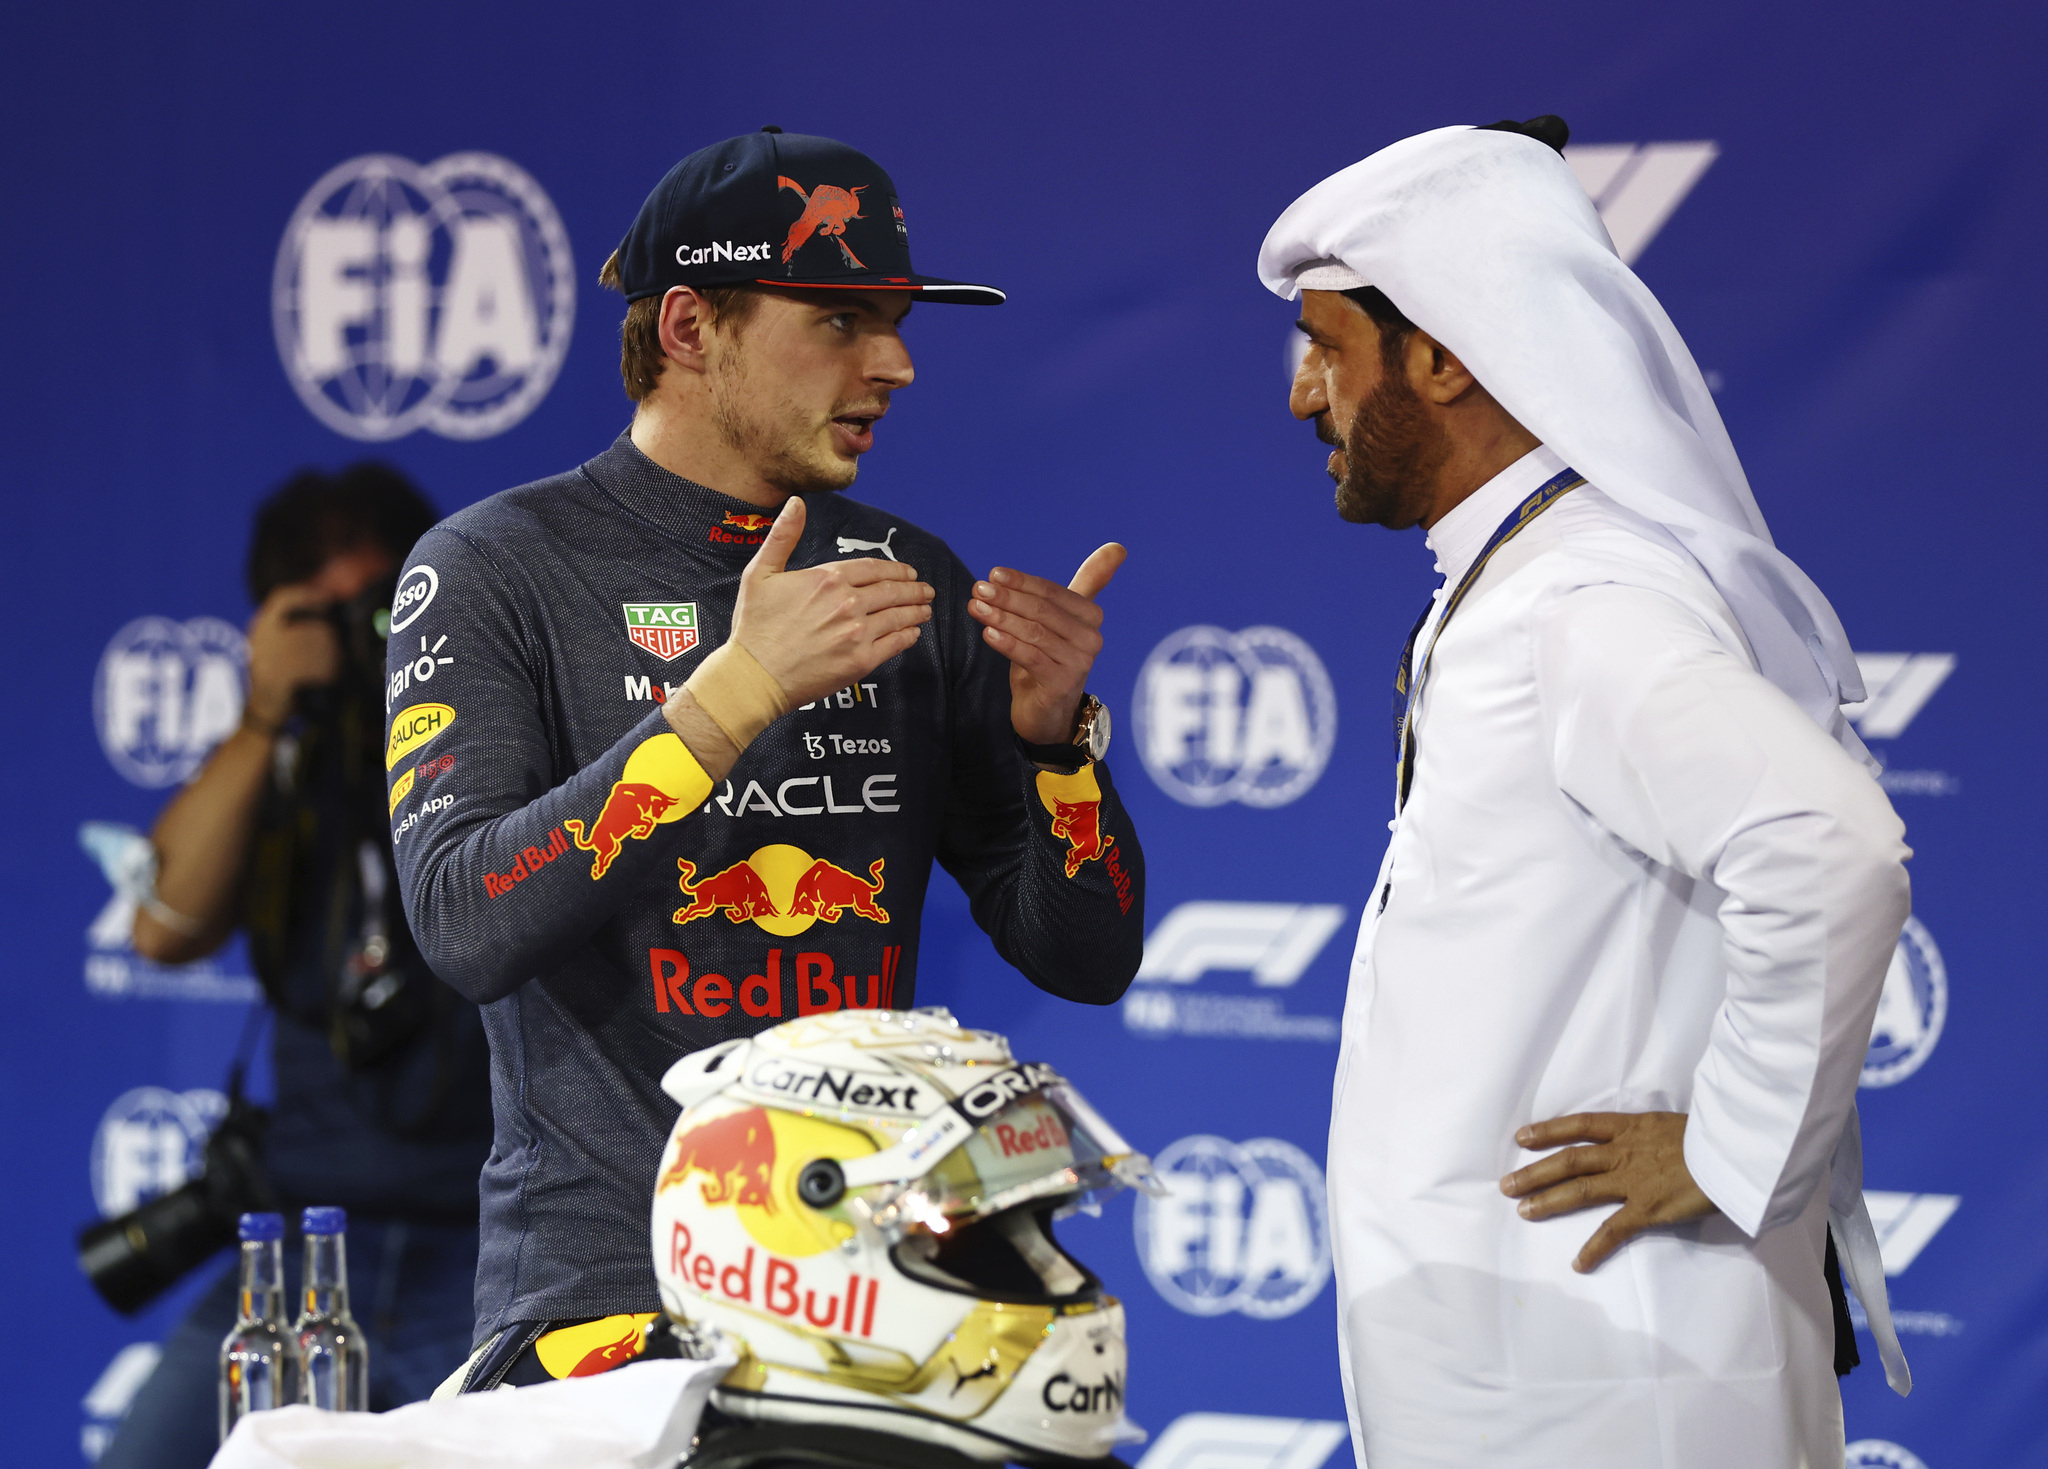 BAHRAIN, BAHRAIN - MARCH 19: Second place qualifier Max Verstappen of the Netherlands and Oracle Red Bull Racing talks with Mohammed ben lt;HIT gt;Sulayem lt;/HIT gt;, FIA President, in parc ferme during qualifying ahead of the F1 Grand Prix of Bahrain at Bahrain International Circuit on March 19, 2022 in Bahrain, Bahrain. (Photo by Lars Baron/Getty Images) Mohammed Ben lt;HIT gt;Sulayem lt;/HIT gt;, Christian Horner y Max Verstappen Firma: Red Bull